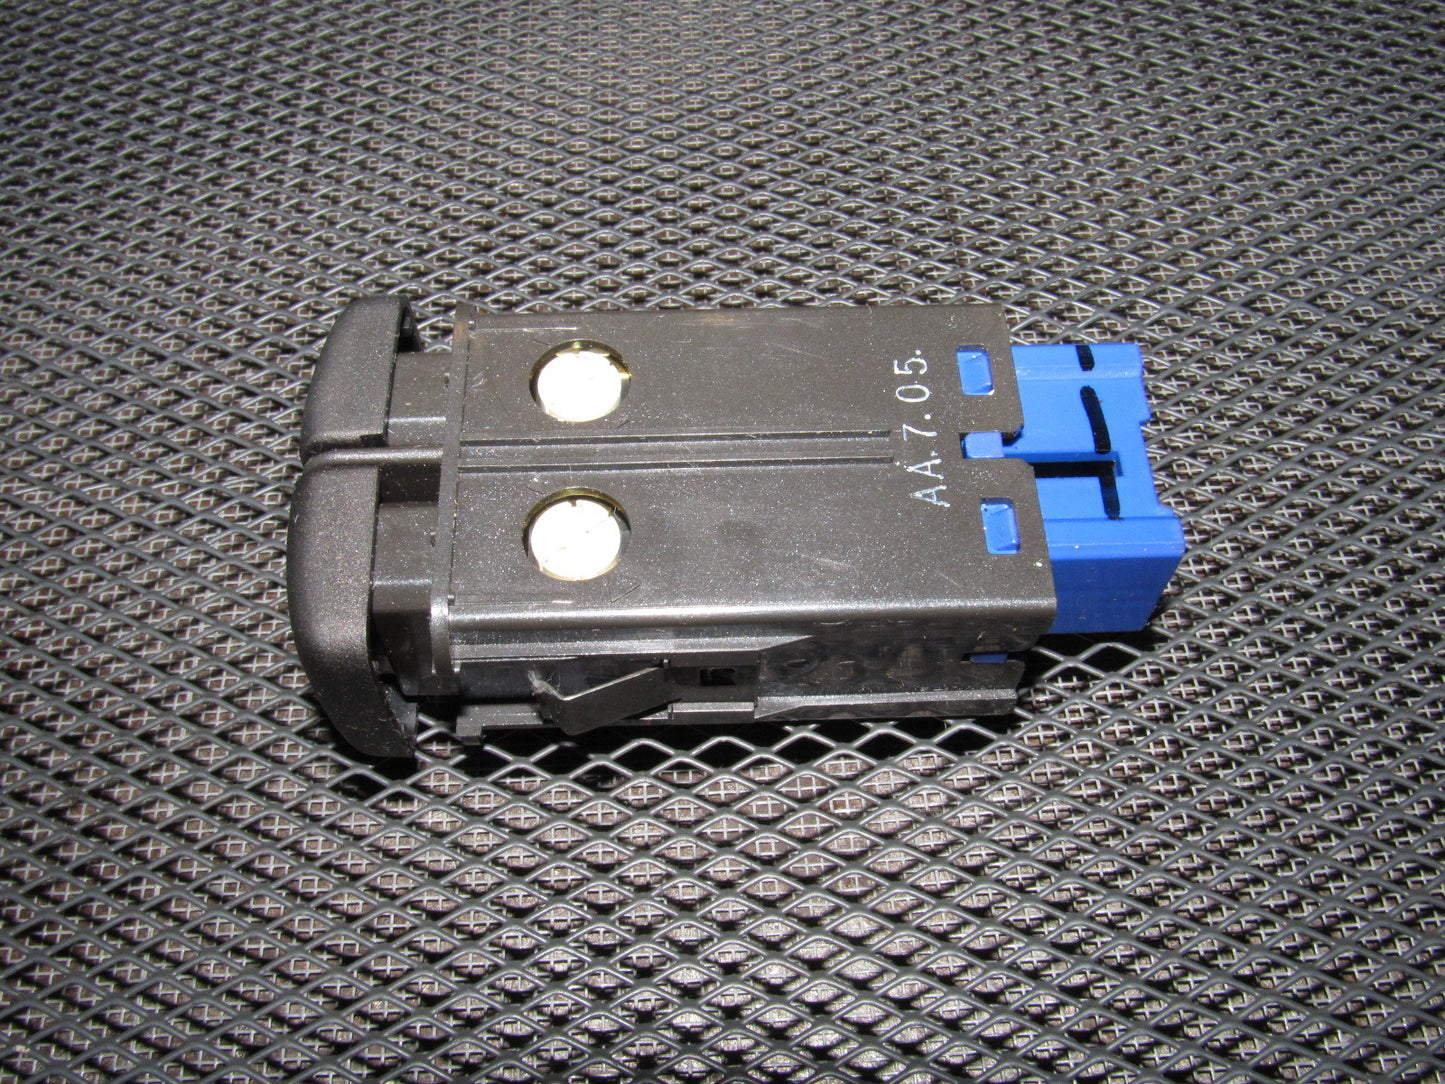 01 02 03 Acura CL OEM Cruise Control And VSA Switch